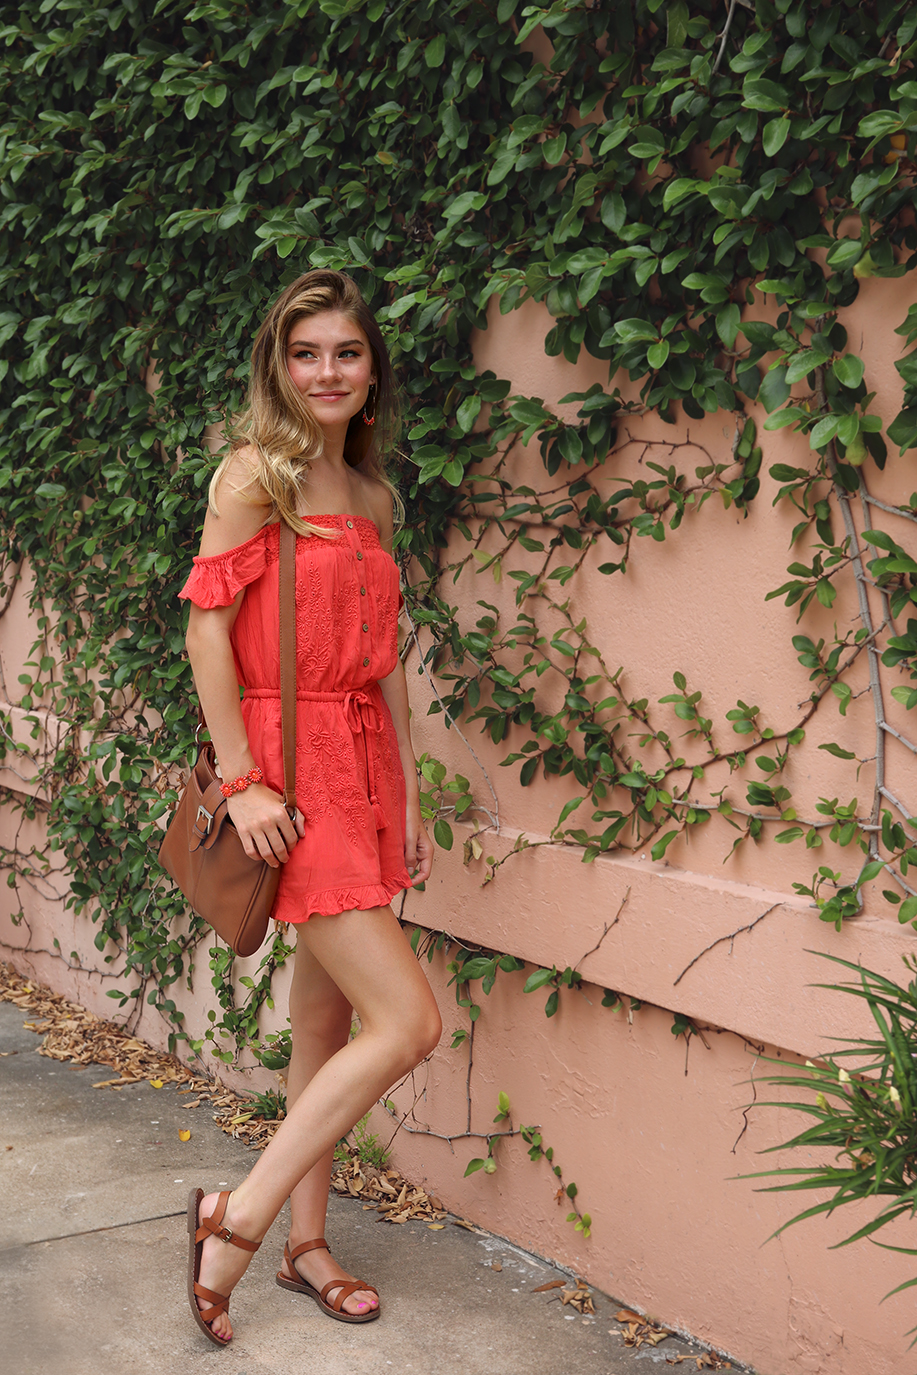 We've gathered our favorite rompers under $50 to help keep you cool during the hot months ahead